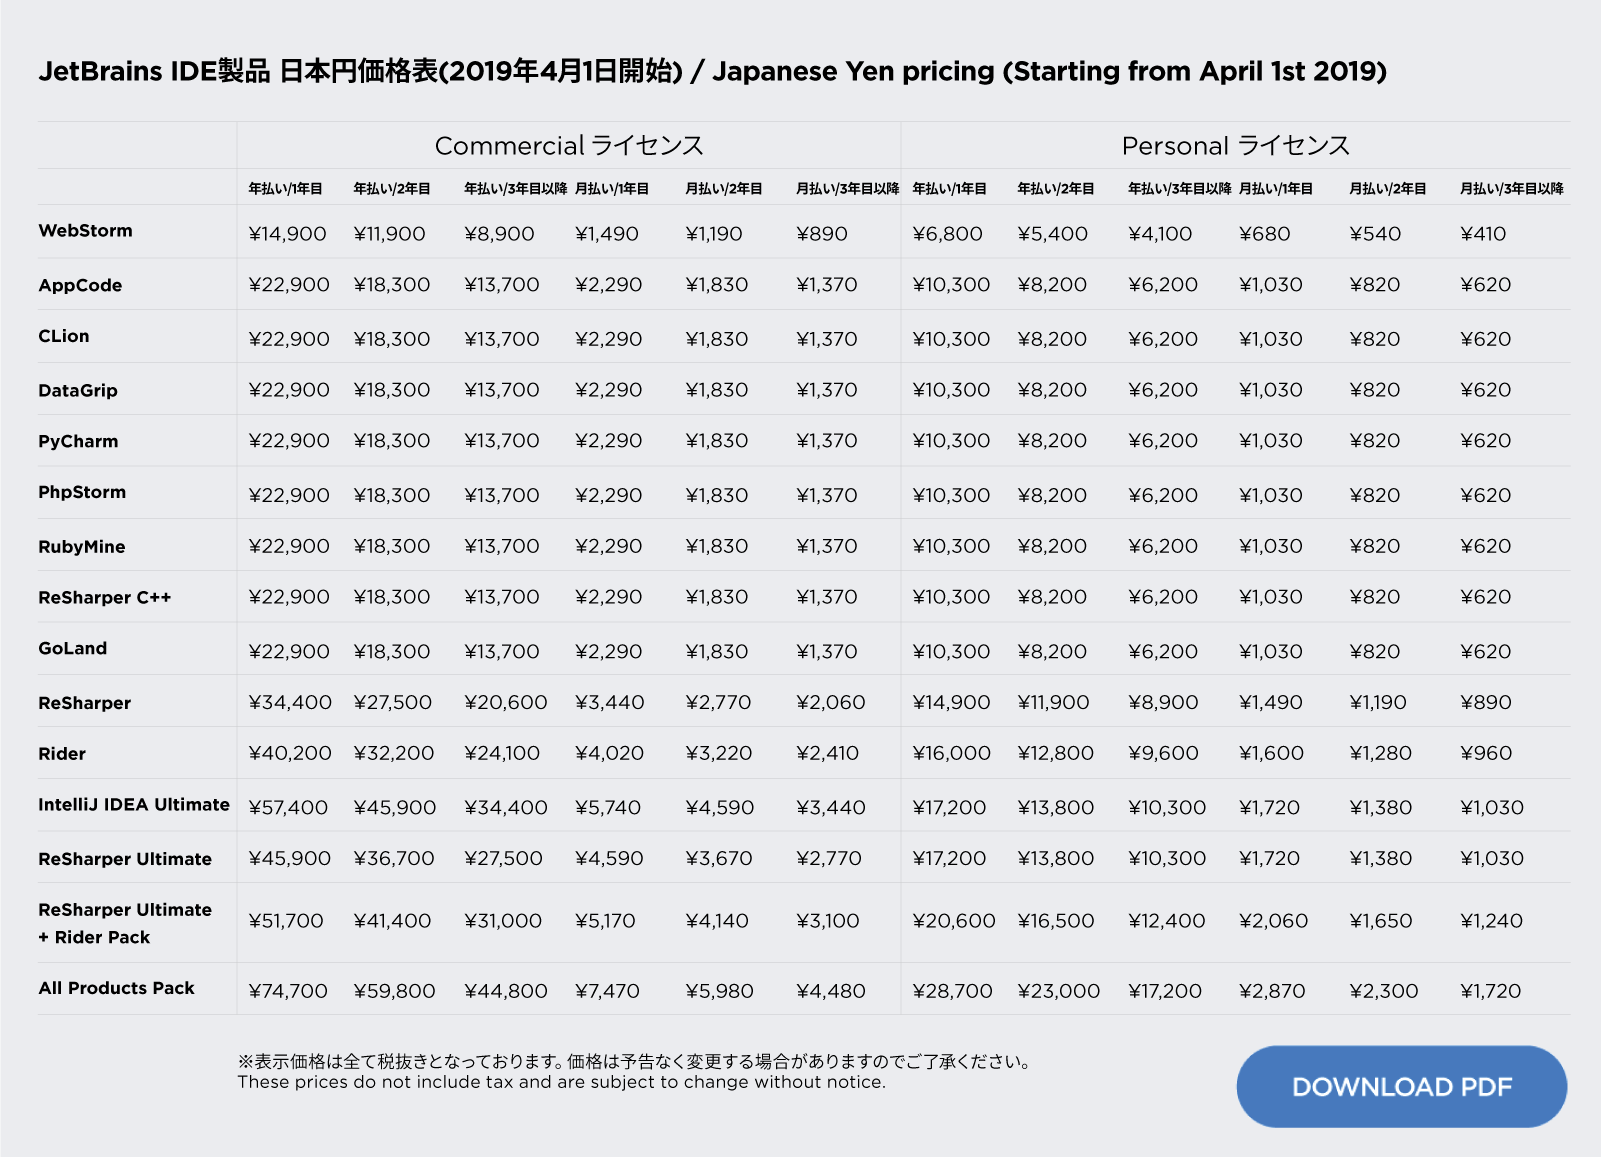 Table_JPY_pricing_edited@2x